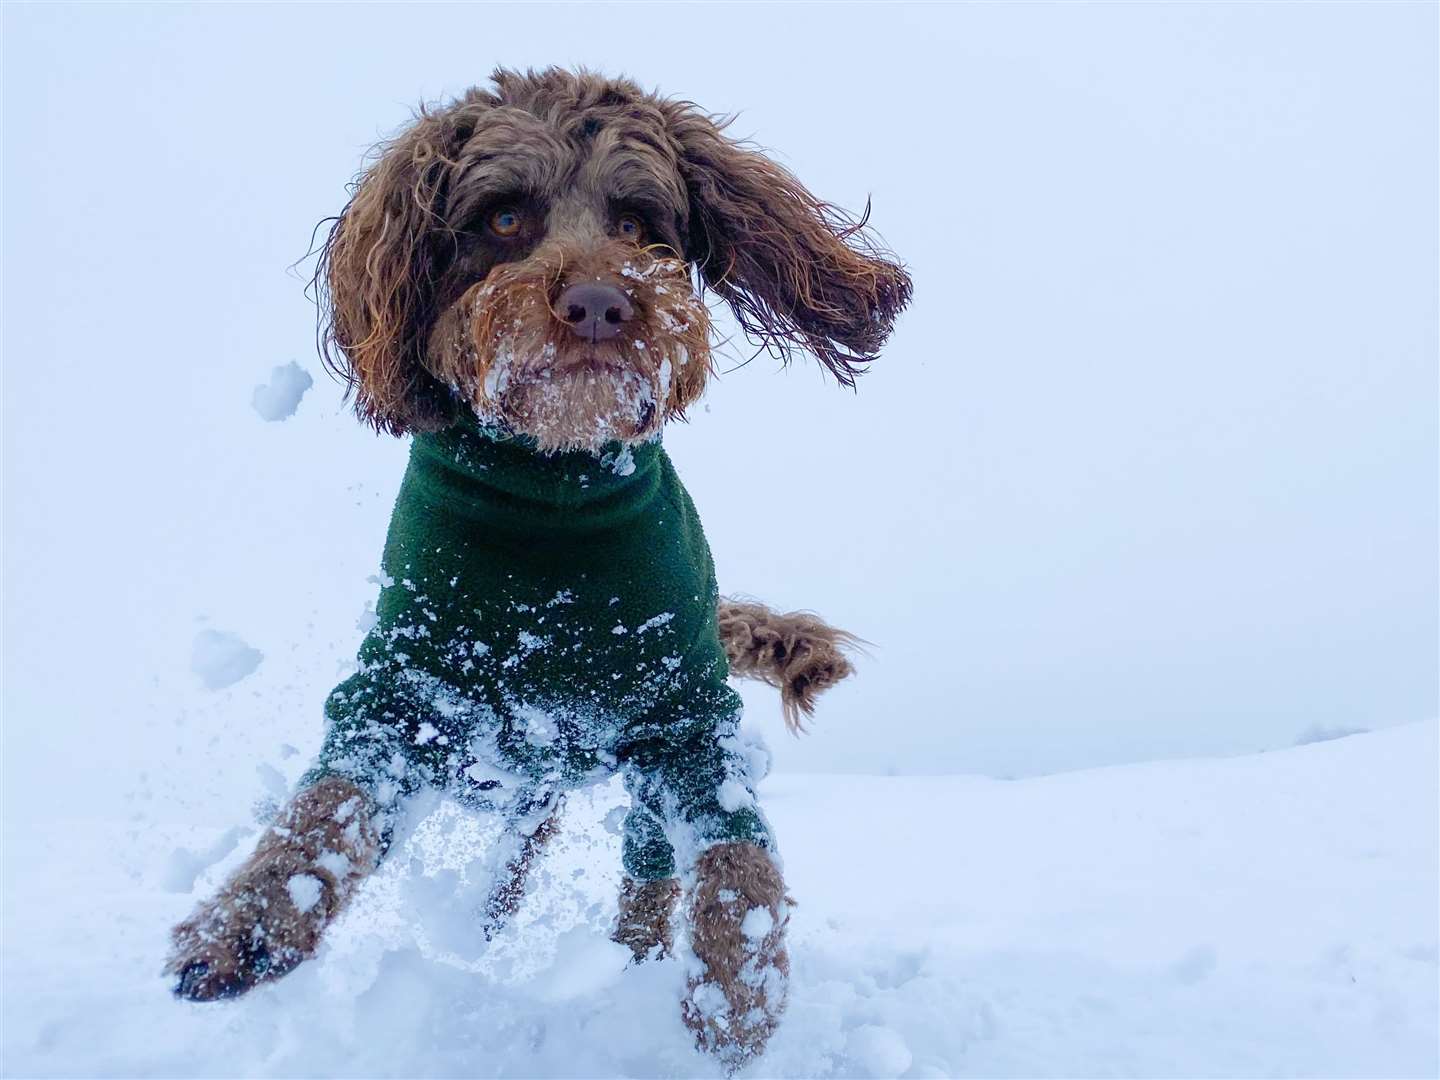 Benji playing in the snow in fields off Thong Lane, Gravesend. Picture: Linda Goodwin